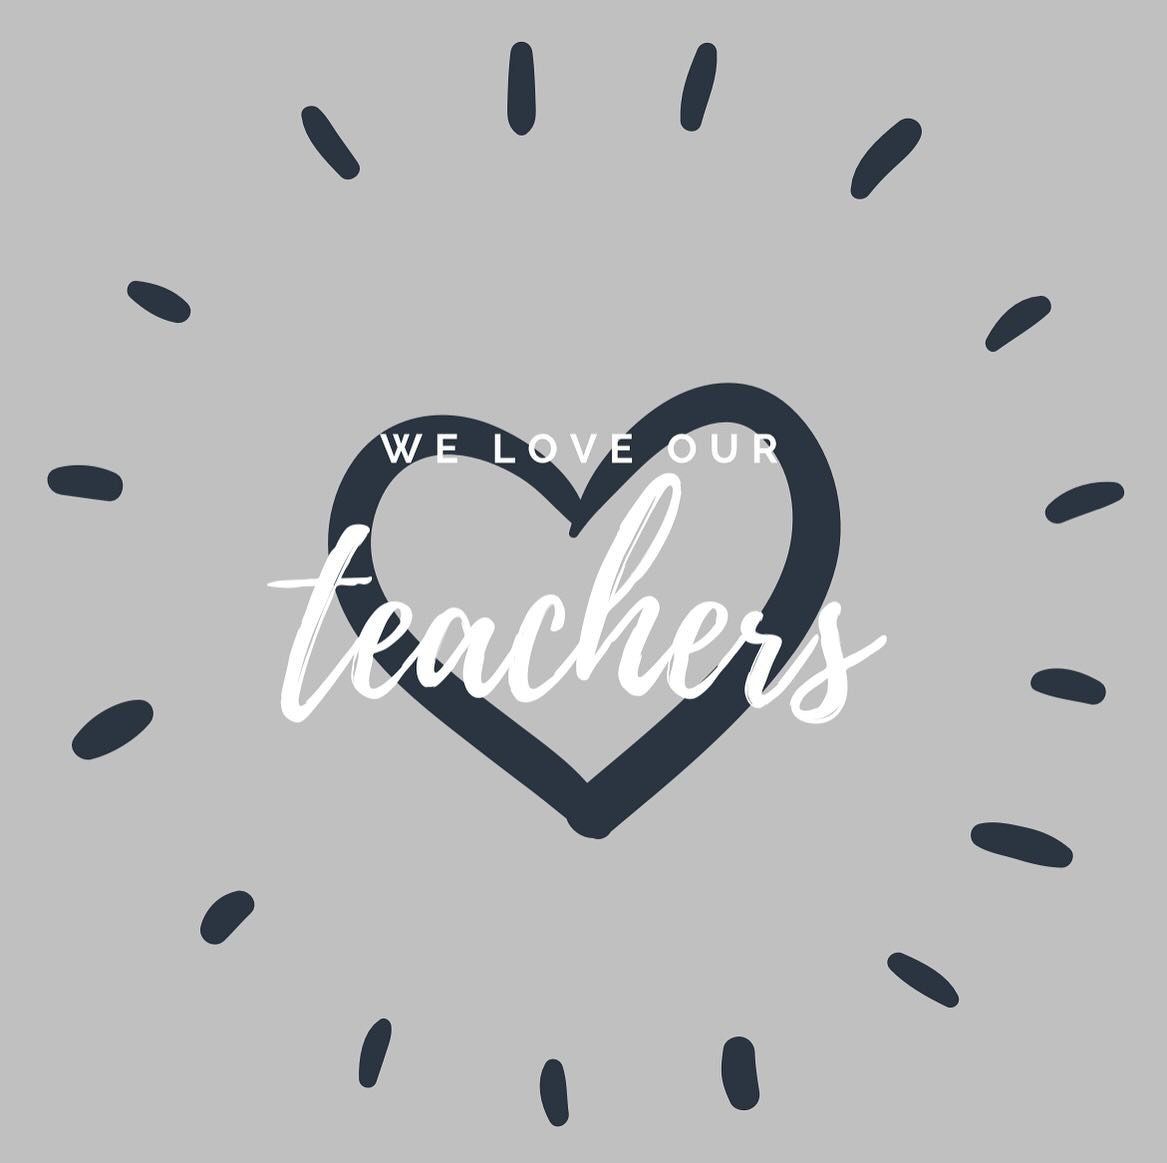 Happy National Teacher Appreciation Week 🍎⁠📝 AND National Nurses Week 🩺
⁠
A huge THANK YOU to all of the amazing teachers &amp; nurses at Premier Charter School!

Their hard work does not go unnoticed and we appreciate everything they do for our s